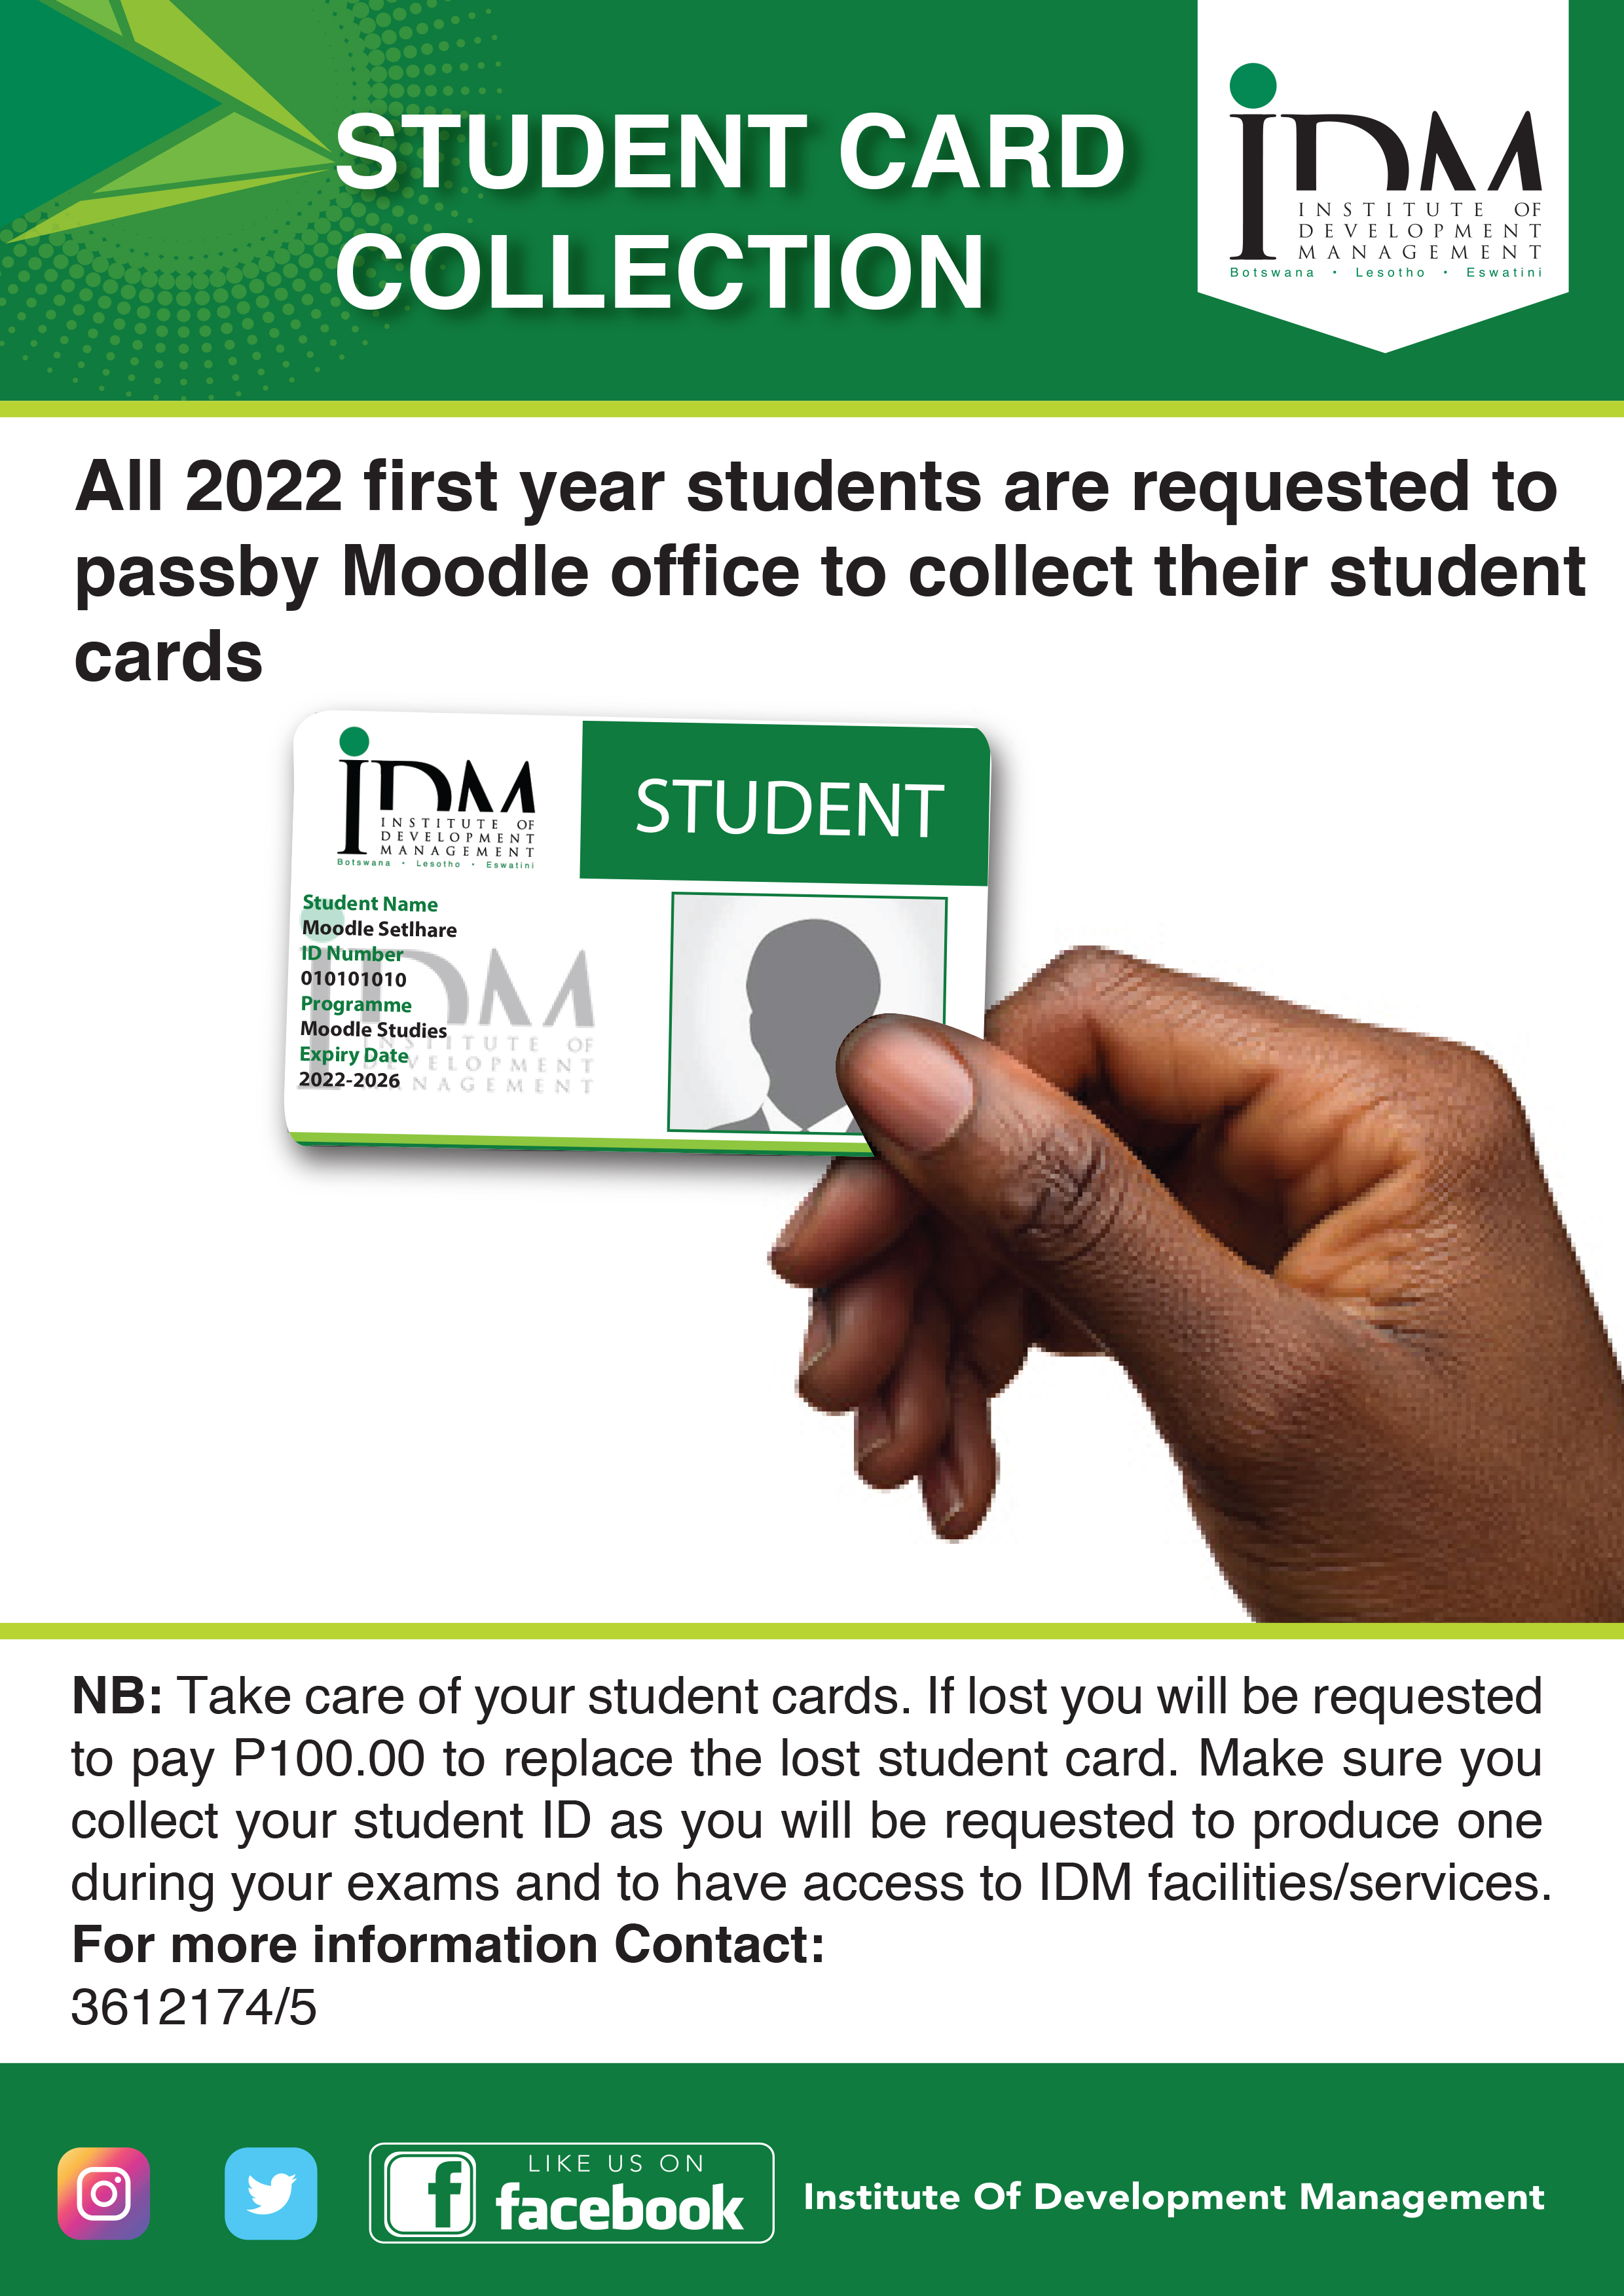 All 2022 first year students are requested to passby Moodle office to collect their student cards